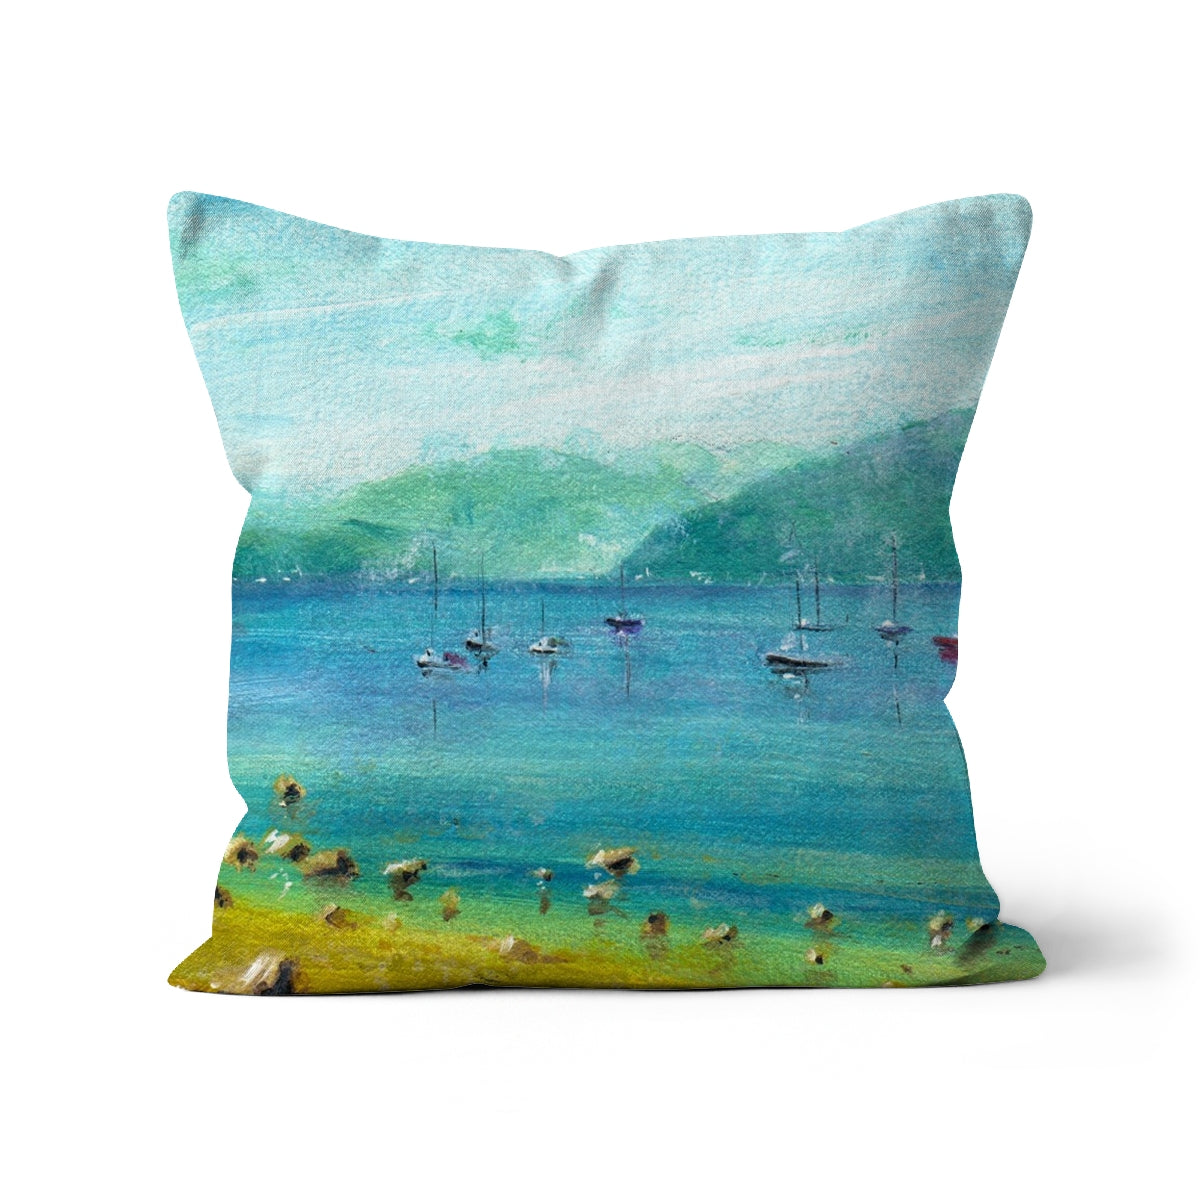 A Clyde Summer Day Art Gifts Cushion-Cushions-River Clyde Art Gallery-Canvas-12"x12"-Paintings, Prints, Homeware, Art Gifts From Scotland By Scottish Artist Kevin Hunter